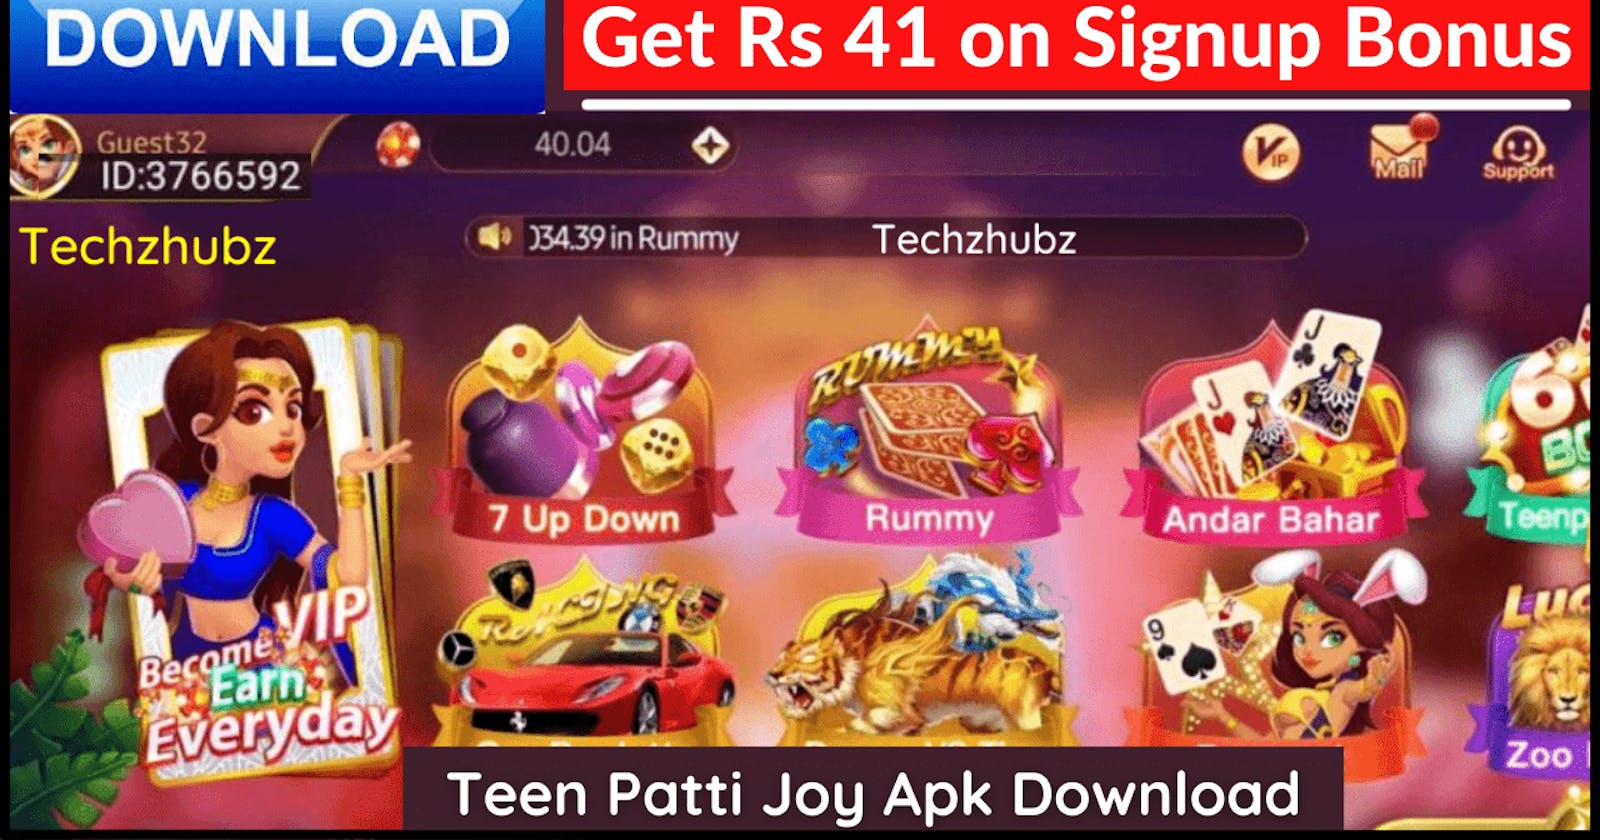 Teen Patti Joy Apk Download | Get Rs 41 on Signup